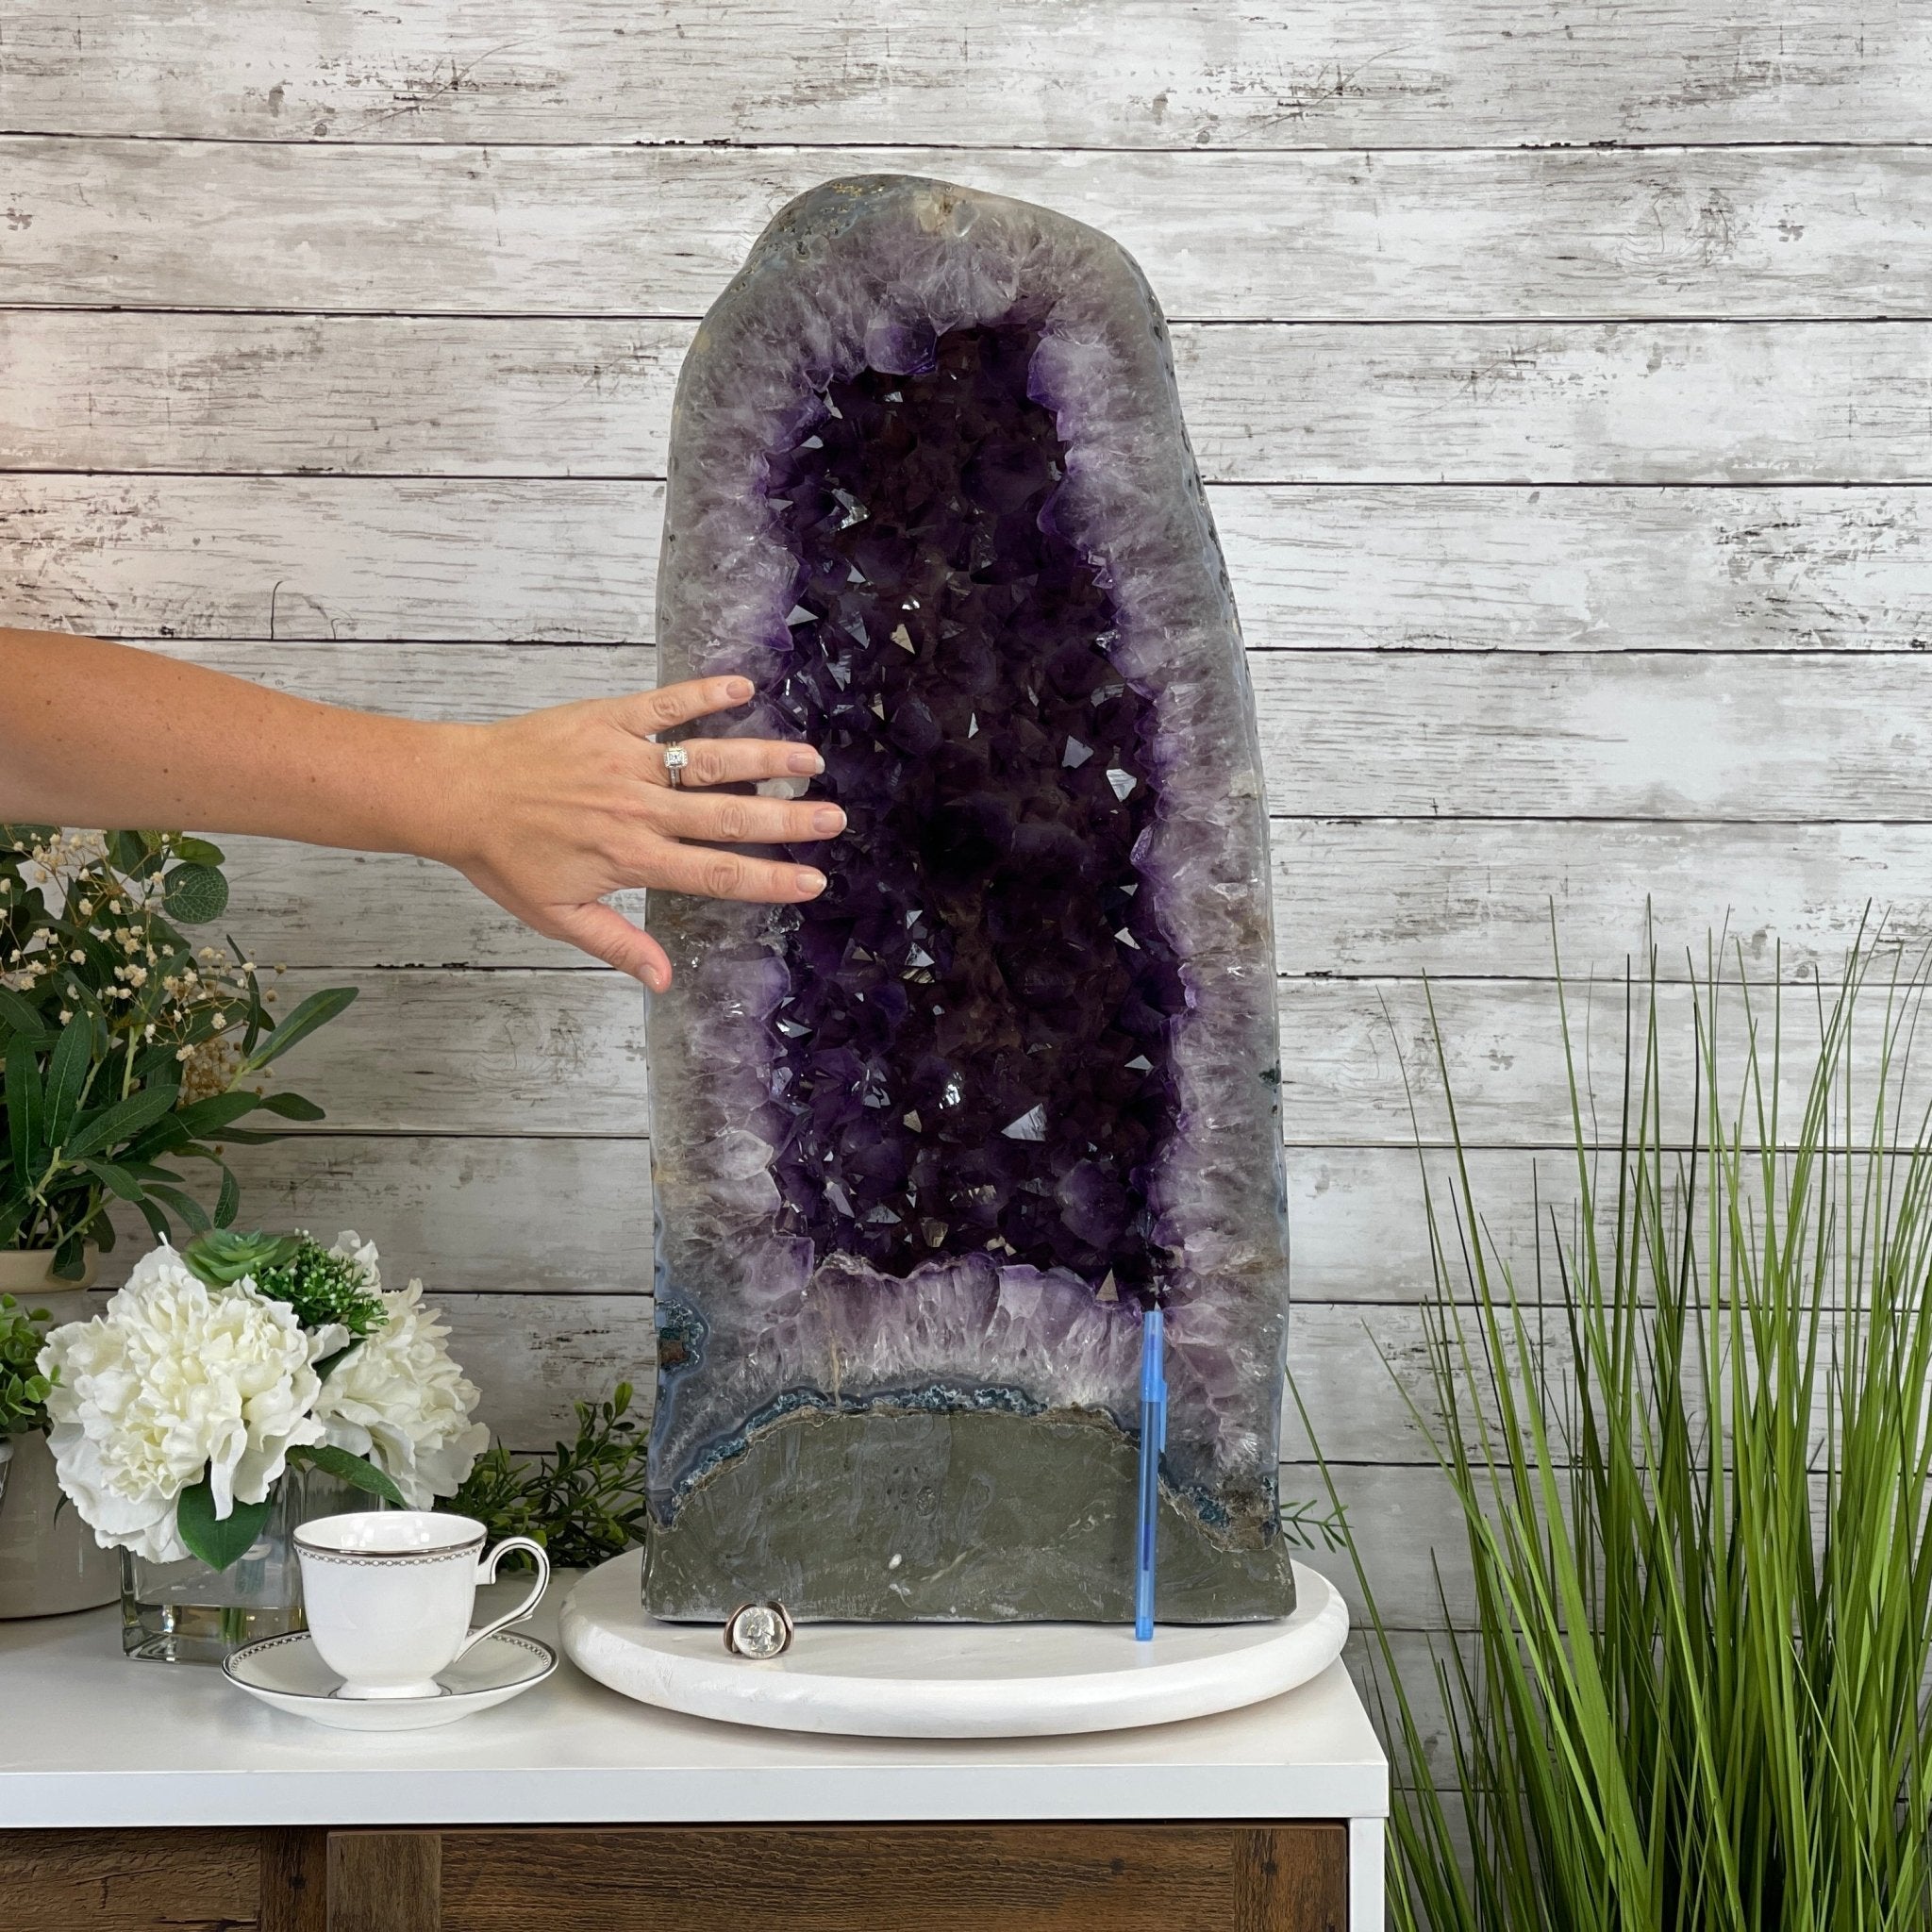 Extra Quality Polished Brazilian Amethyst Cathedral, 93.4 lbs & 26.75" tall Model #5602-0138 by Brazil Gems - Brazil GemsBrazil GemsExtra Quality Polished Brazilian Amethyst Cathedral, 93.4 lbs & 26.75" tall Model #5602-0138 by Brazil GemsPolished Cathedrals5602-0138